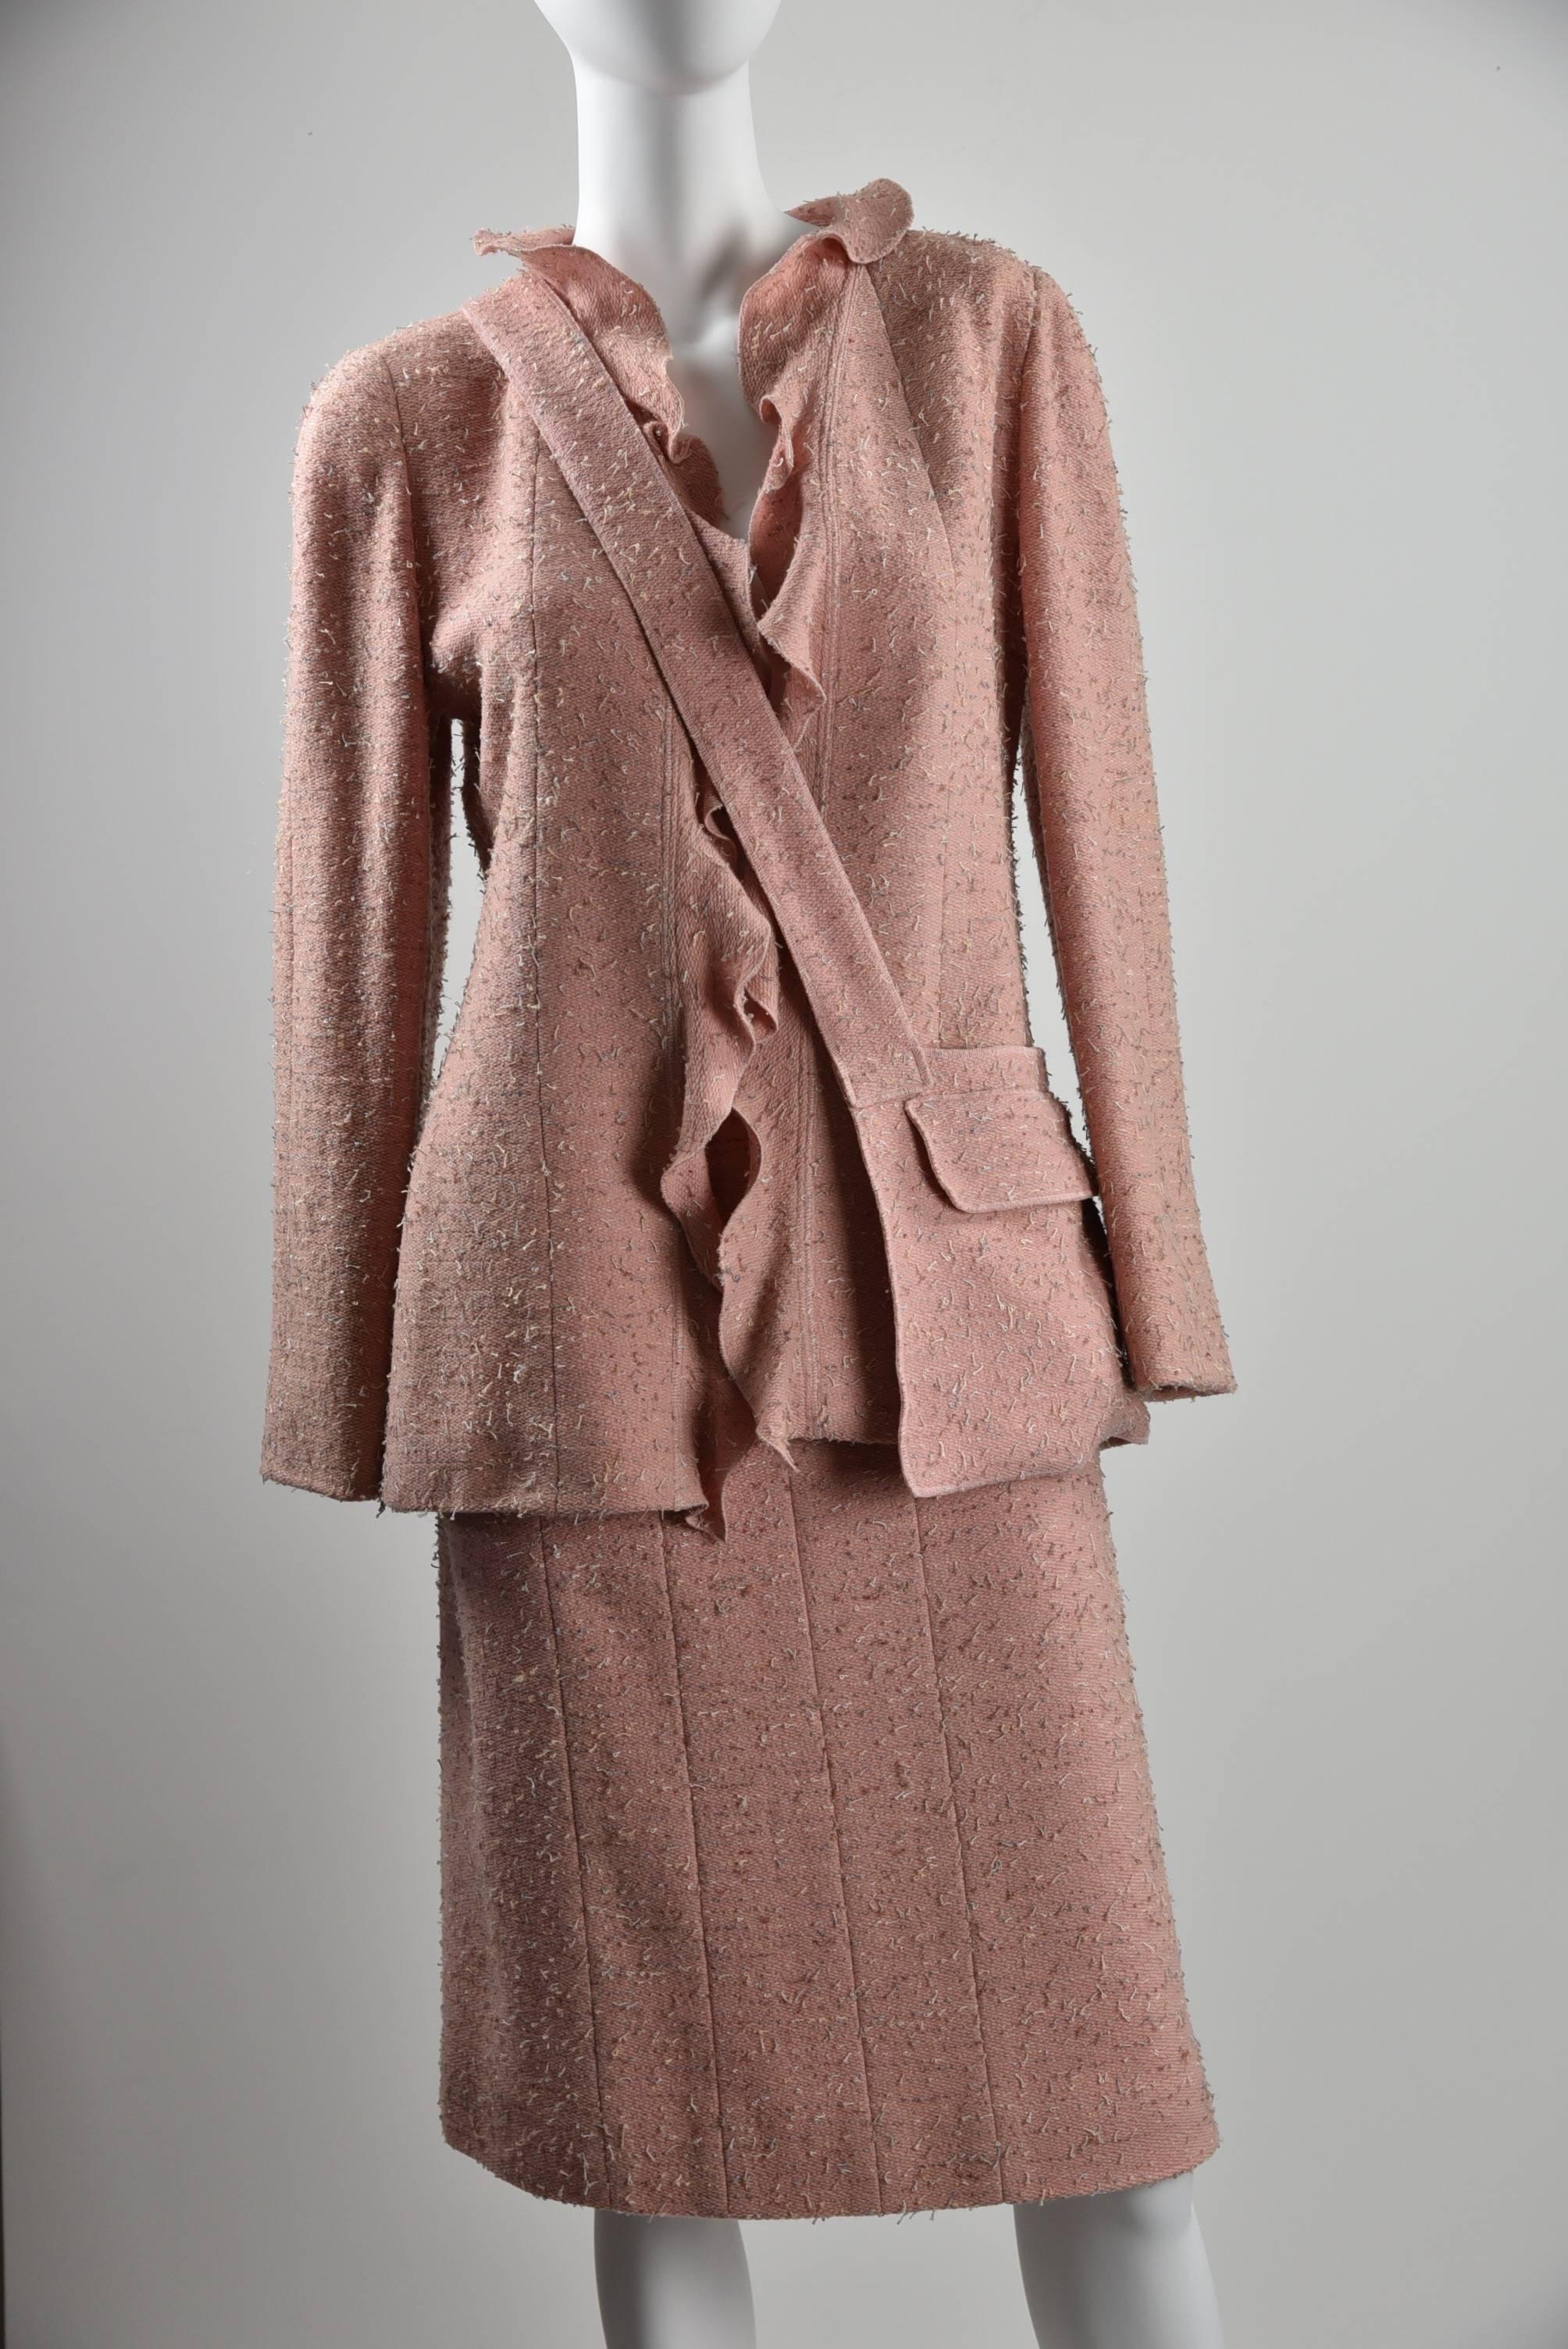 Suit is pink with tweed yarns of brown and ivory.83% wool, 15% polyester,2% nylon, lining is 95% silk and 5% spandex.  The matching pouch has a silver CHANEL identifier.  Chanel buttons are conspicuously missing from this garment, using the ruffled